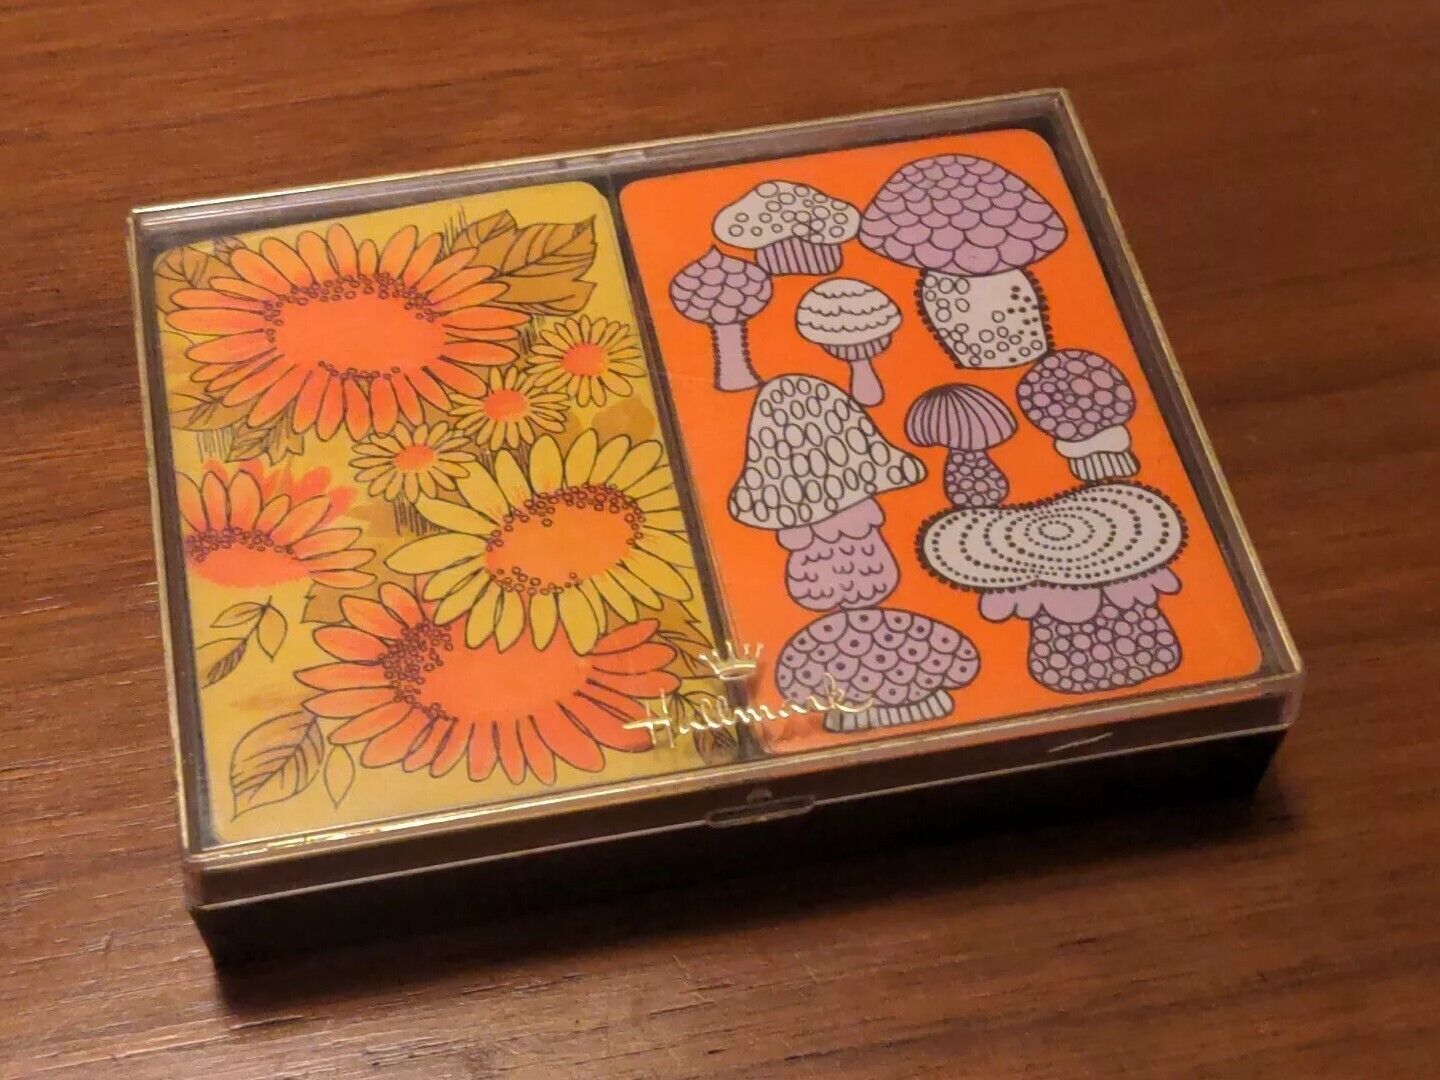 RaRe VinTagE HALLMARK MUSHROOMS FLOWERS Playing Cards in case 60s/70s 